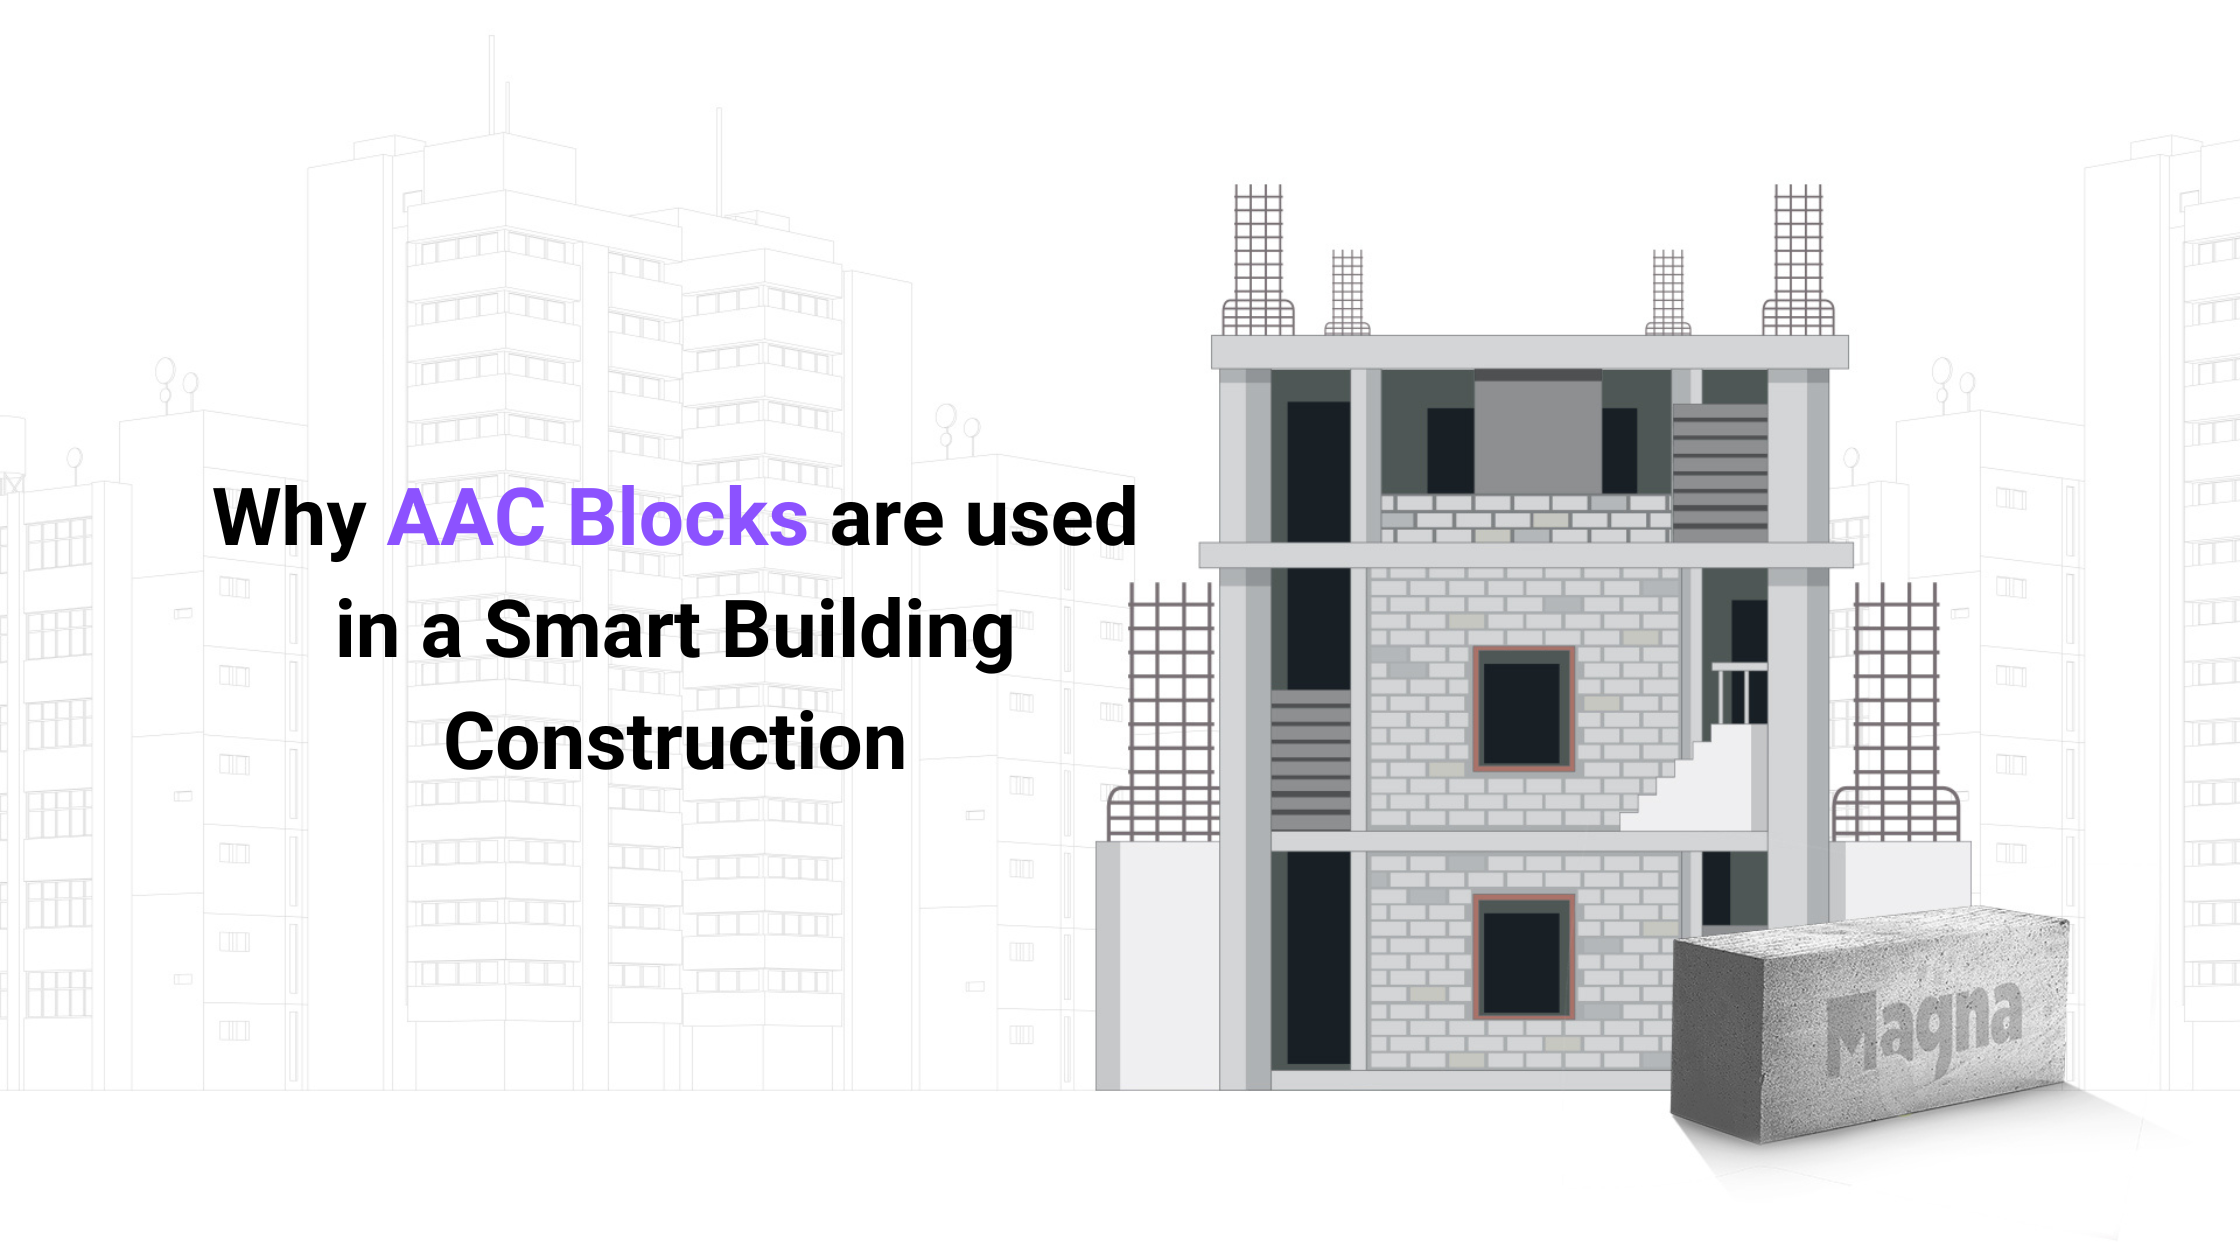 Why AAC Blocks are used in a Smart Building Construction